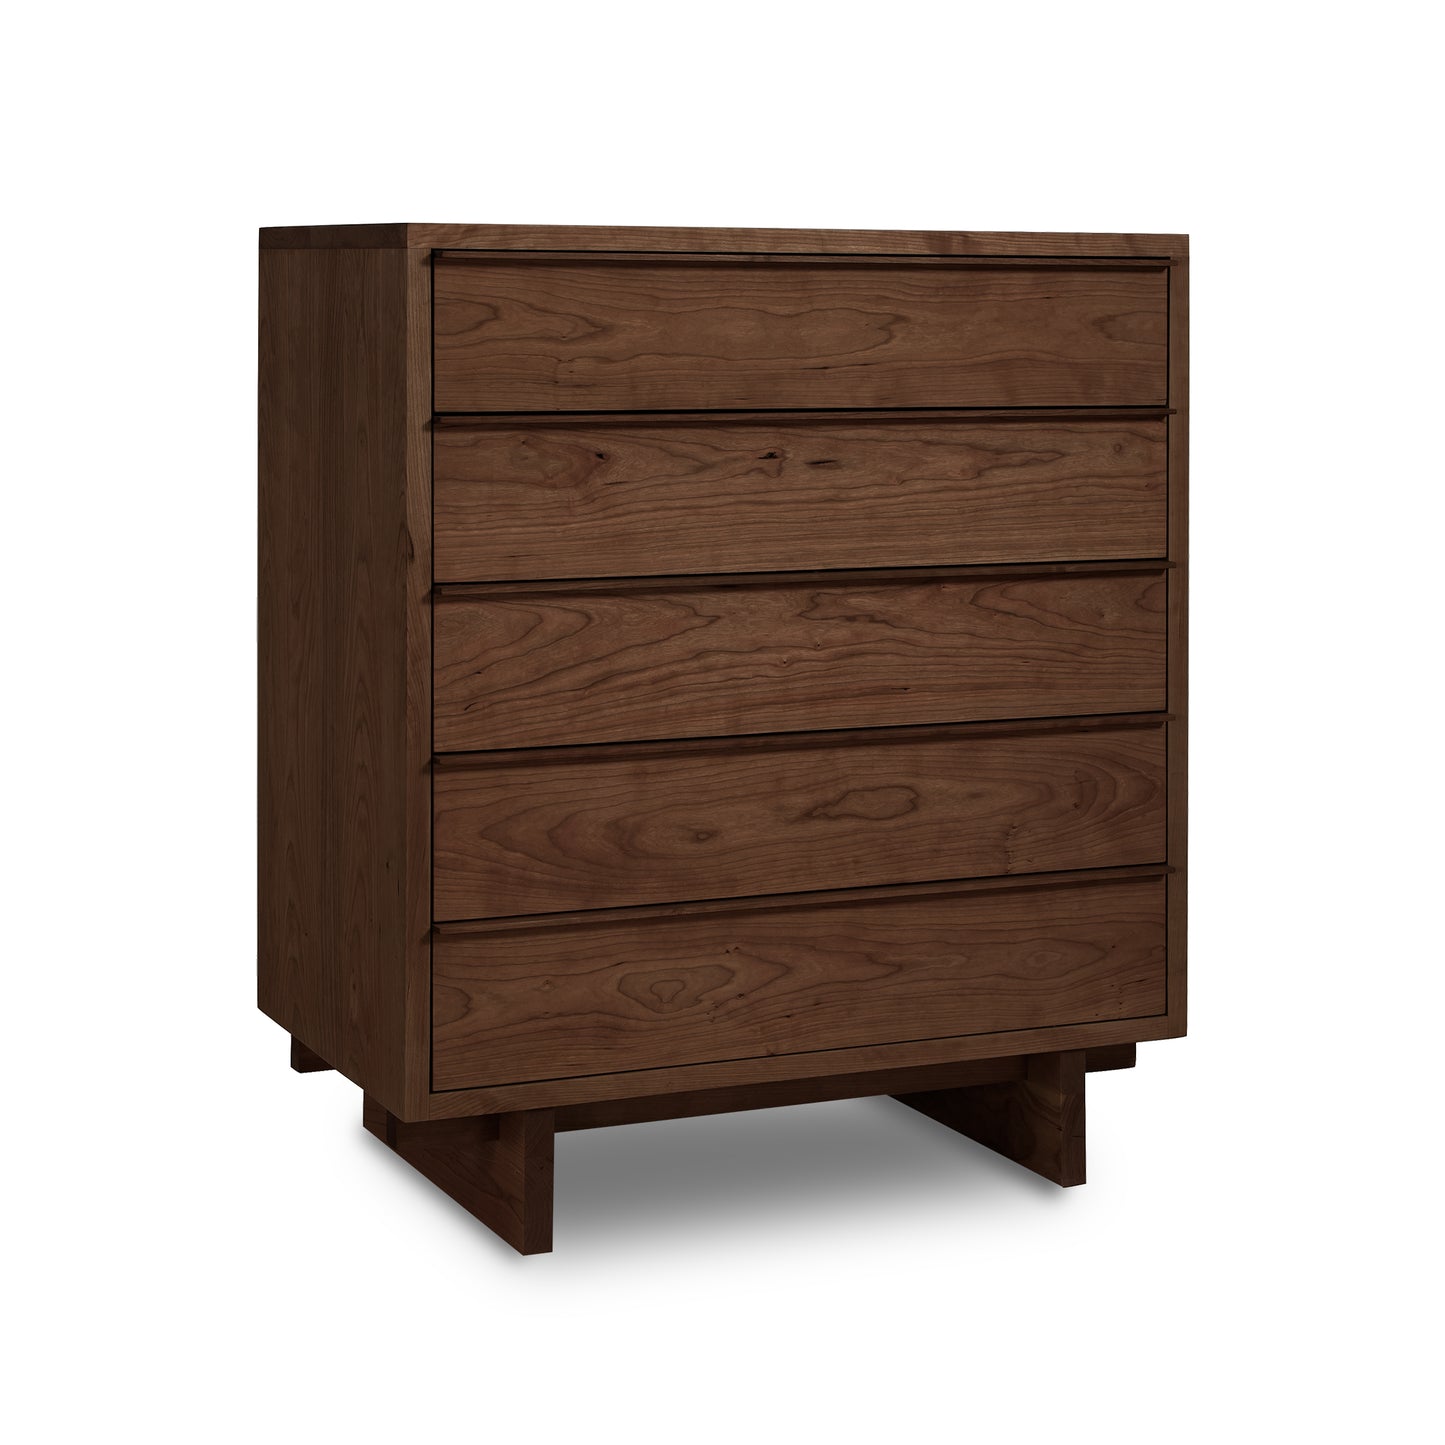 A Kipling 5-Drawer Wide Chest from Vermont Furniture Designs, featuring four drawers.